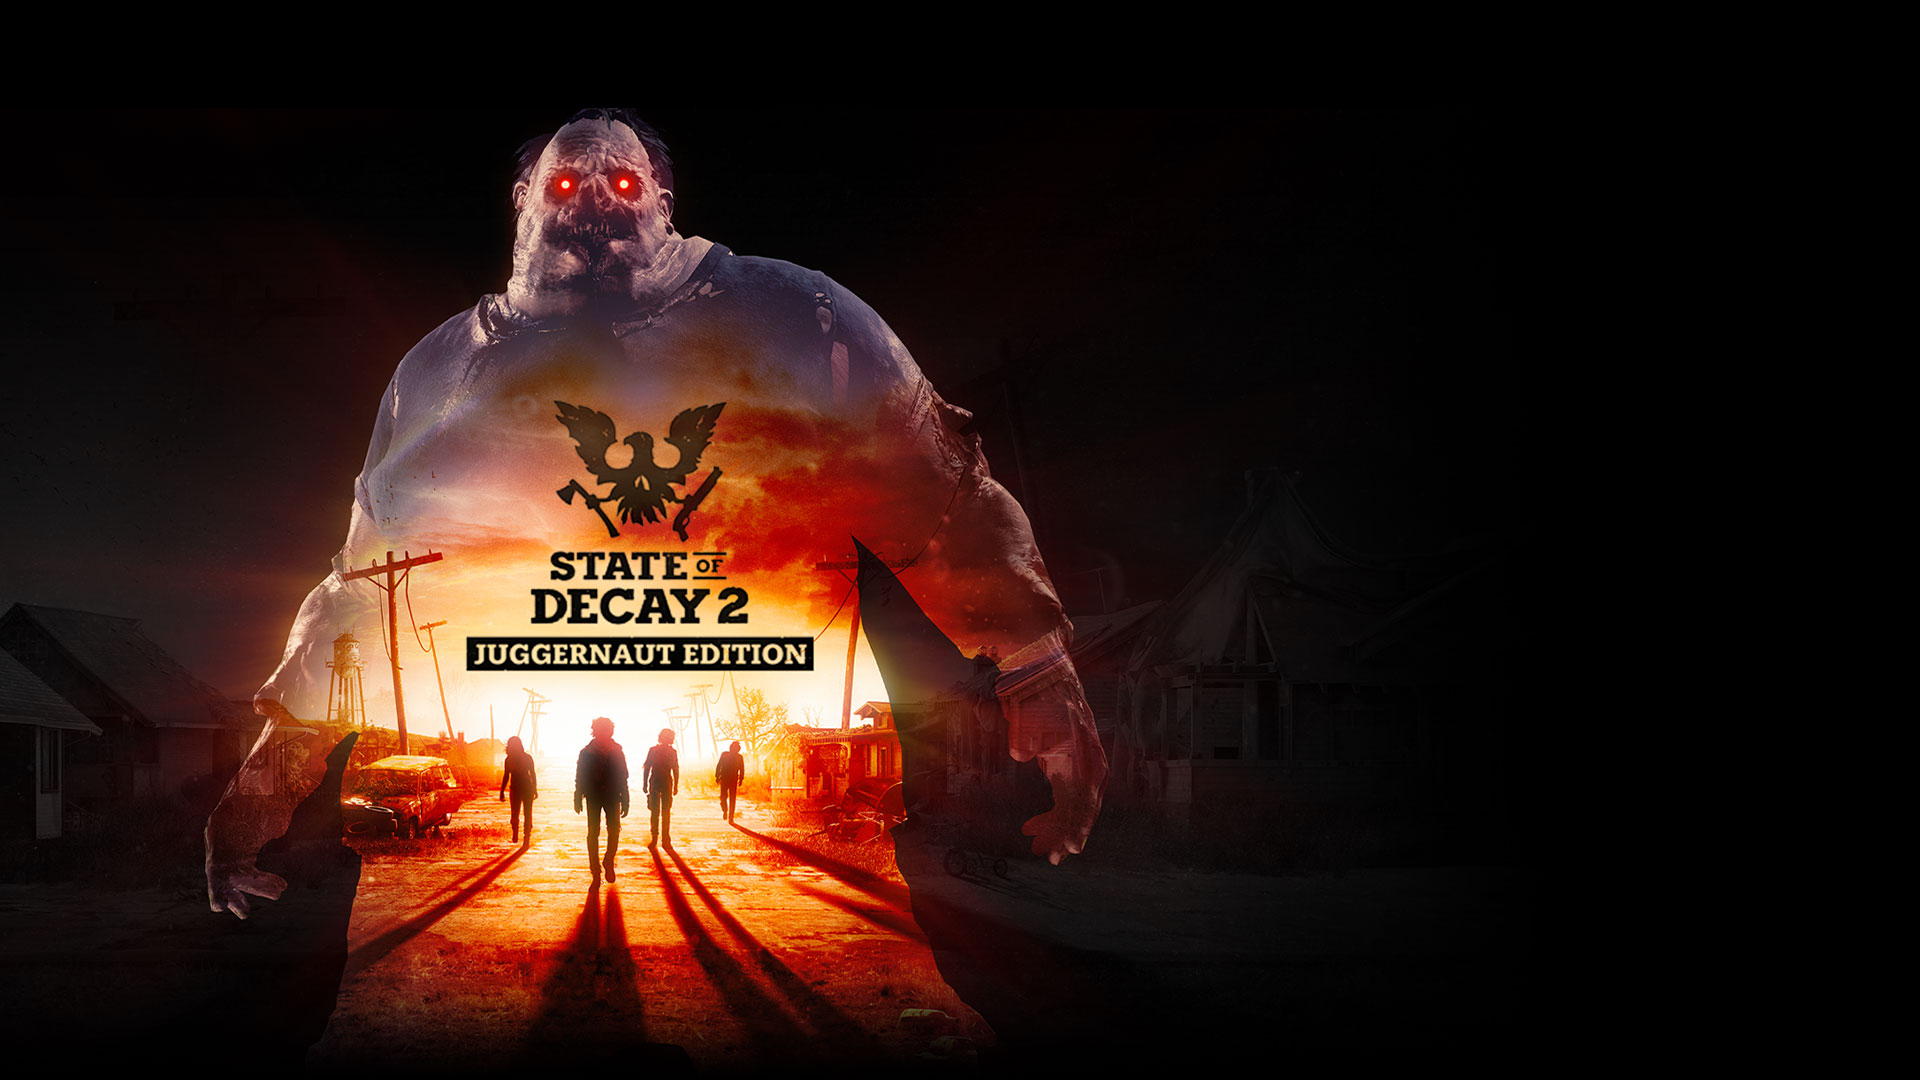 State of Decay 2: Juggernaut Edition, silhouette of the Juggernaut with zombies on an abandoned street